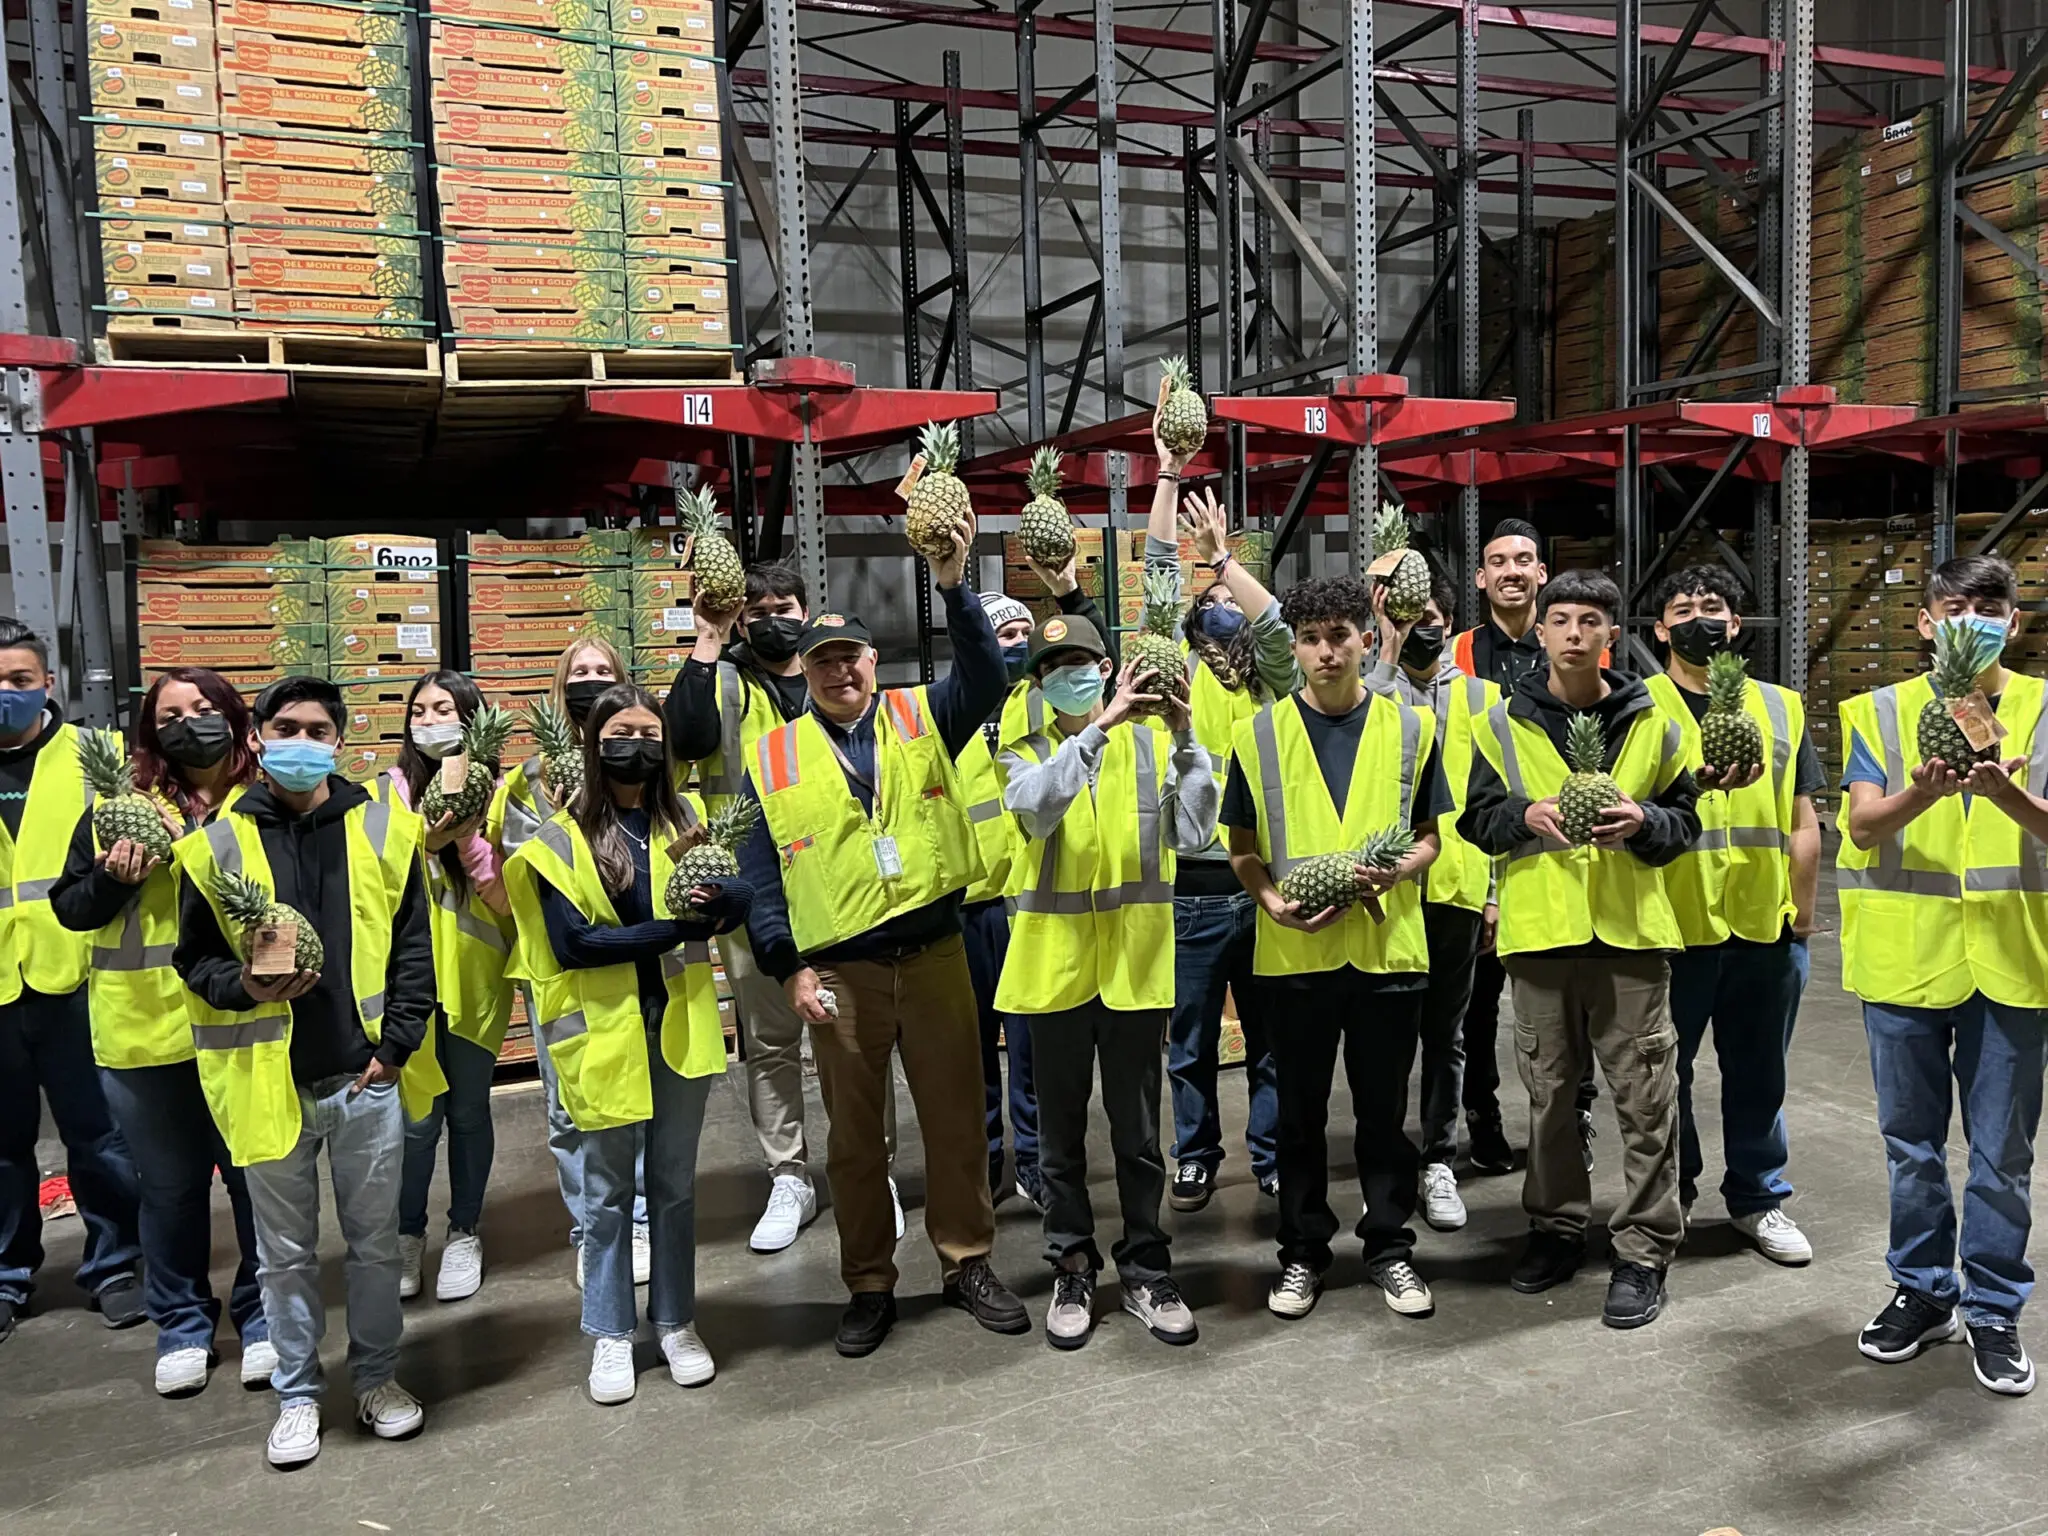 A group of people in yellow safety vests stands in a warehouse, holding pineapples. Pallets of boxed goods are stacked on shelves behind them as they engage in an educational session about inventory management.